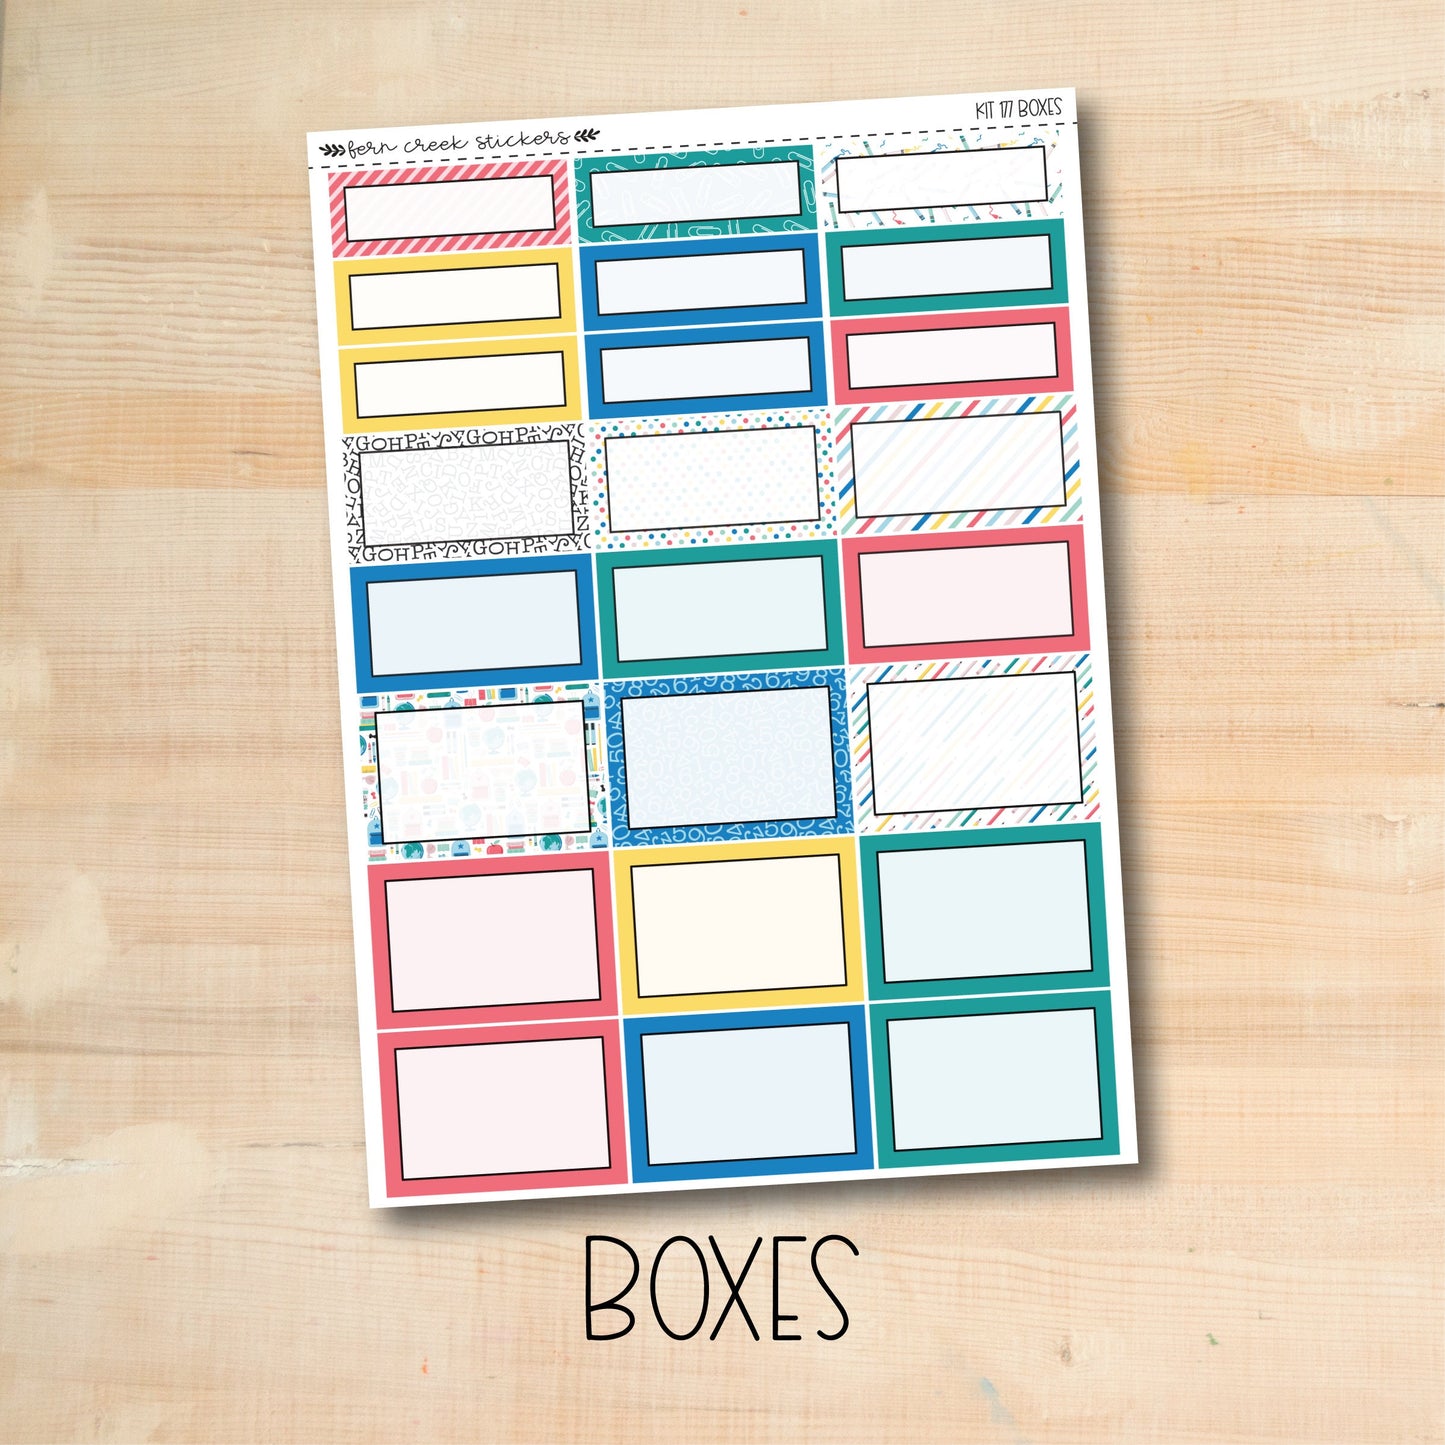 KIT-177 || BACK To SCHOOL weekly planner kit for Erin Condren, Plum Paper, MakseLife and more!